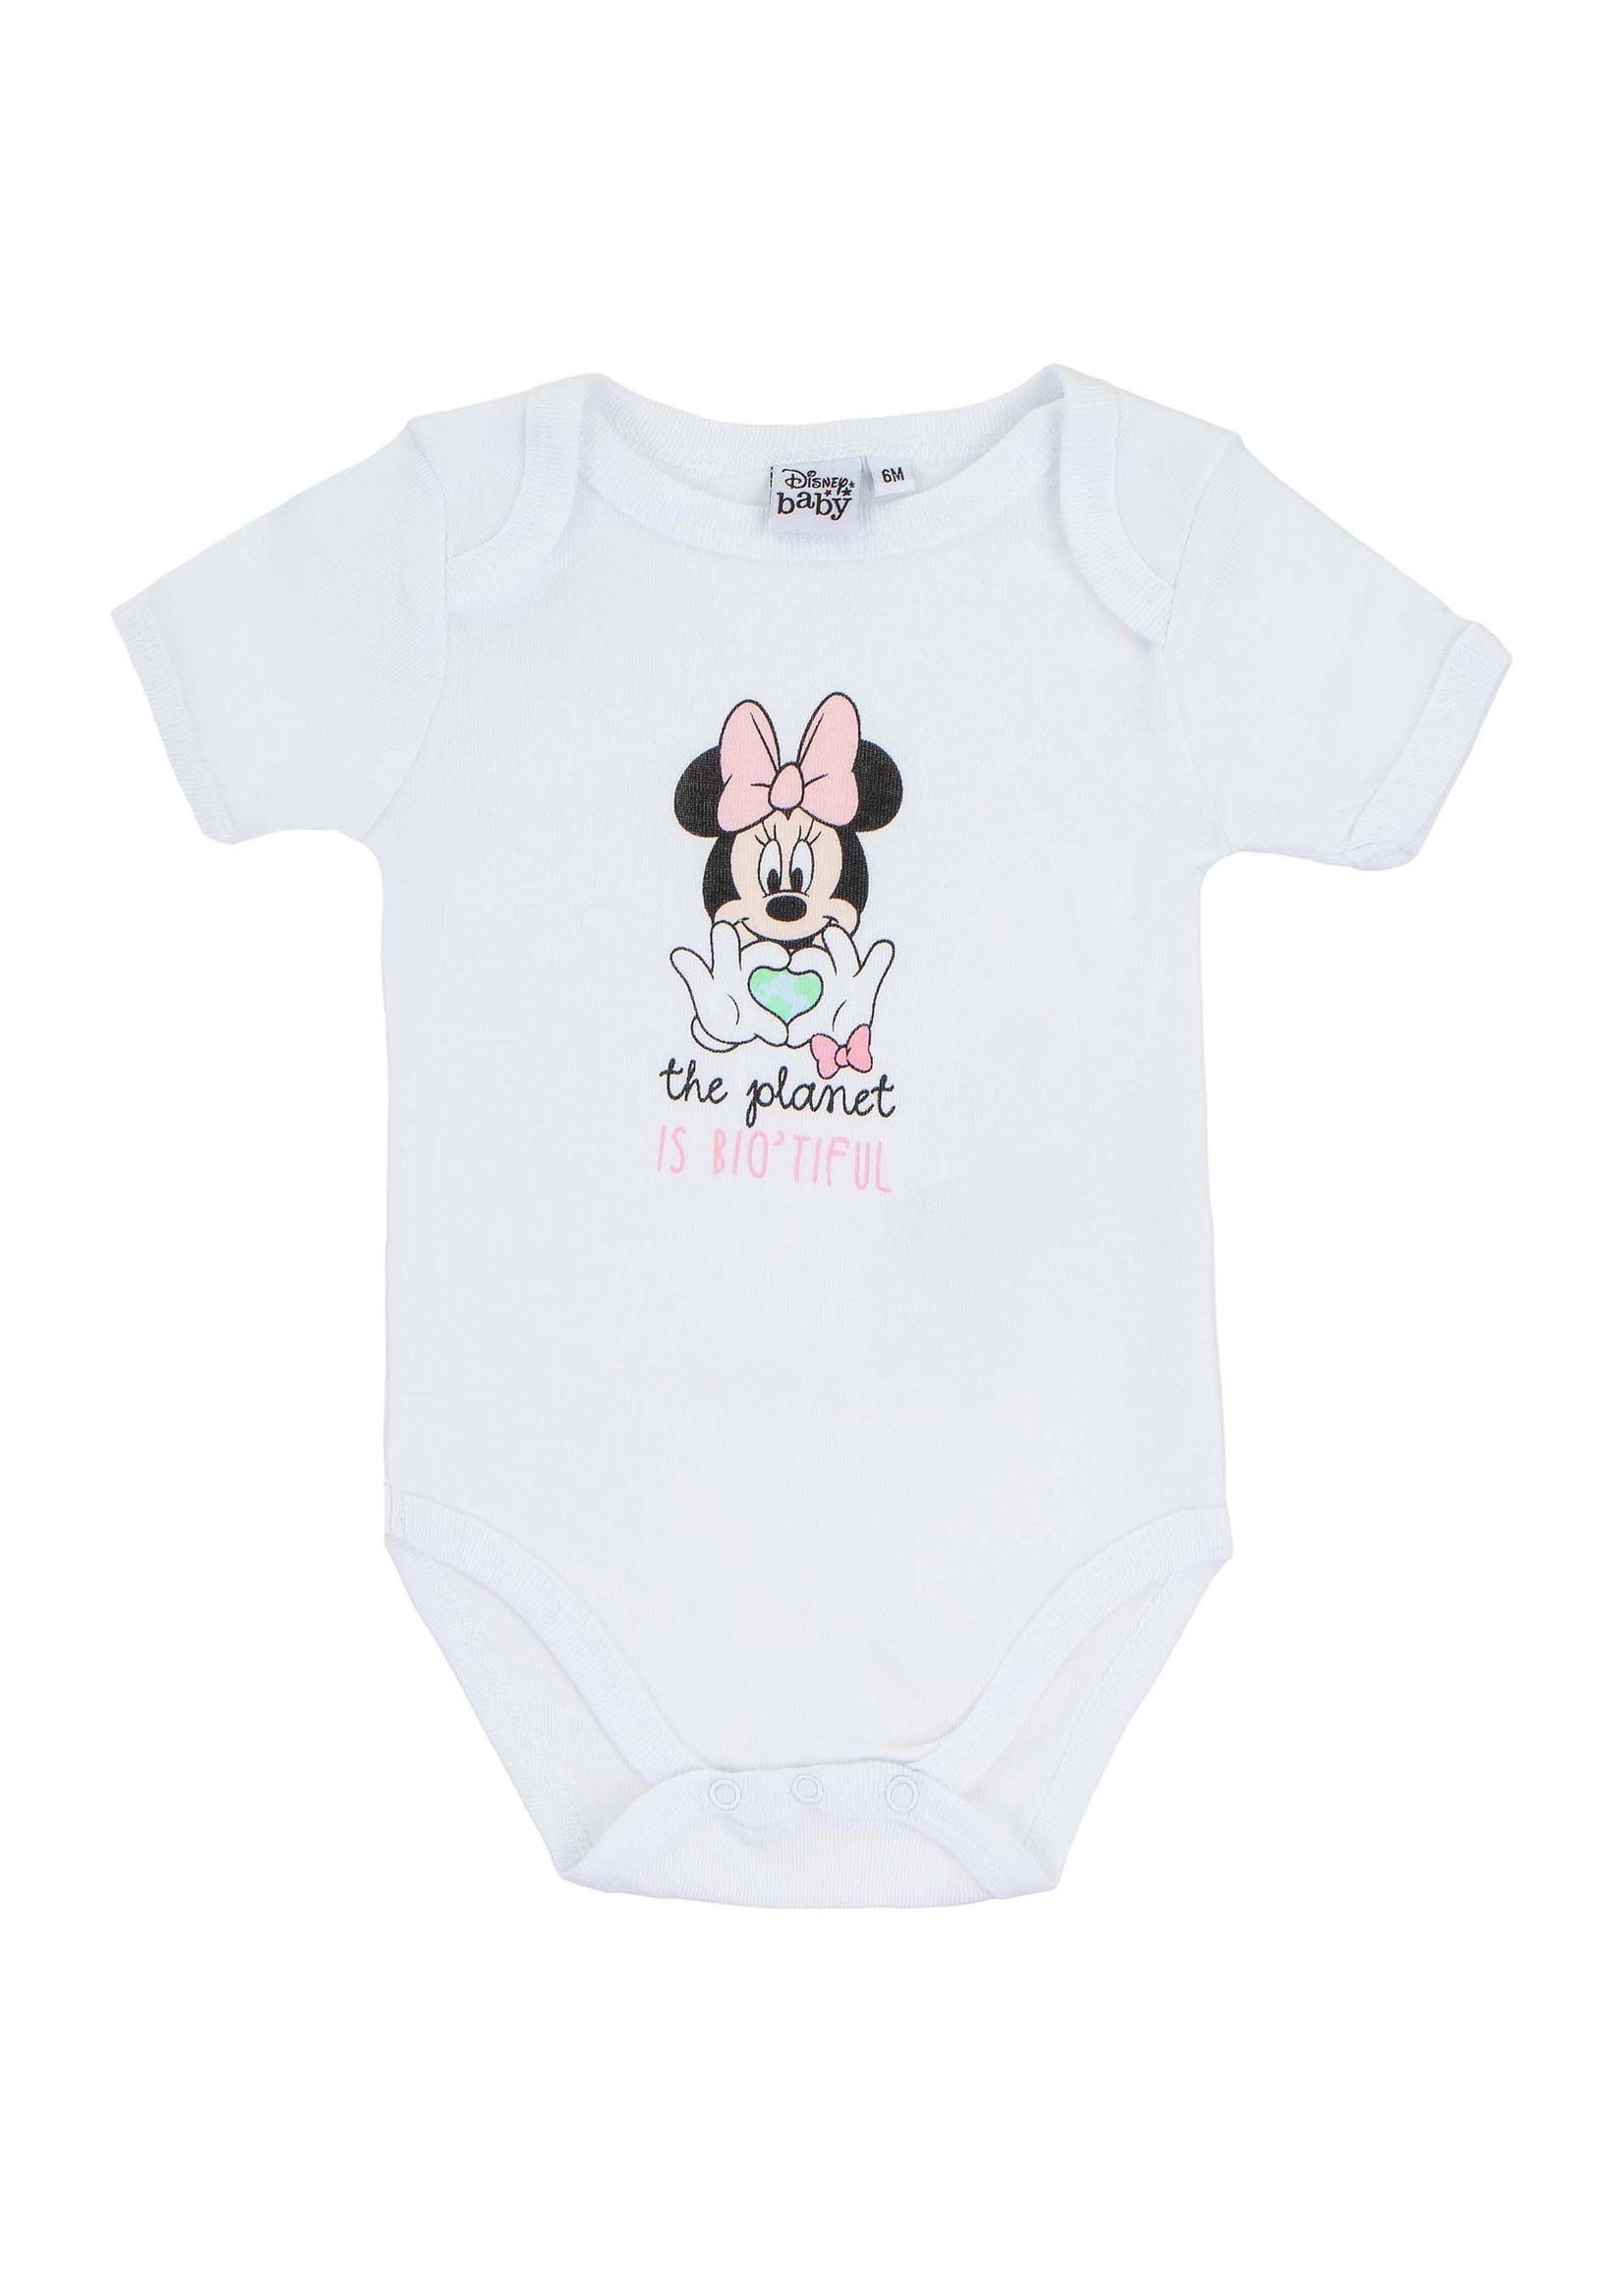 Disney baby Minnie Mouse organic rompers from Disney baby 2 pack